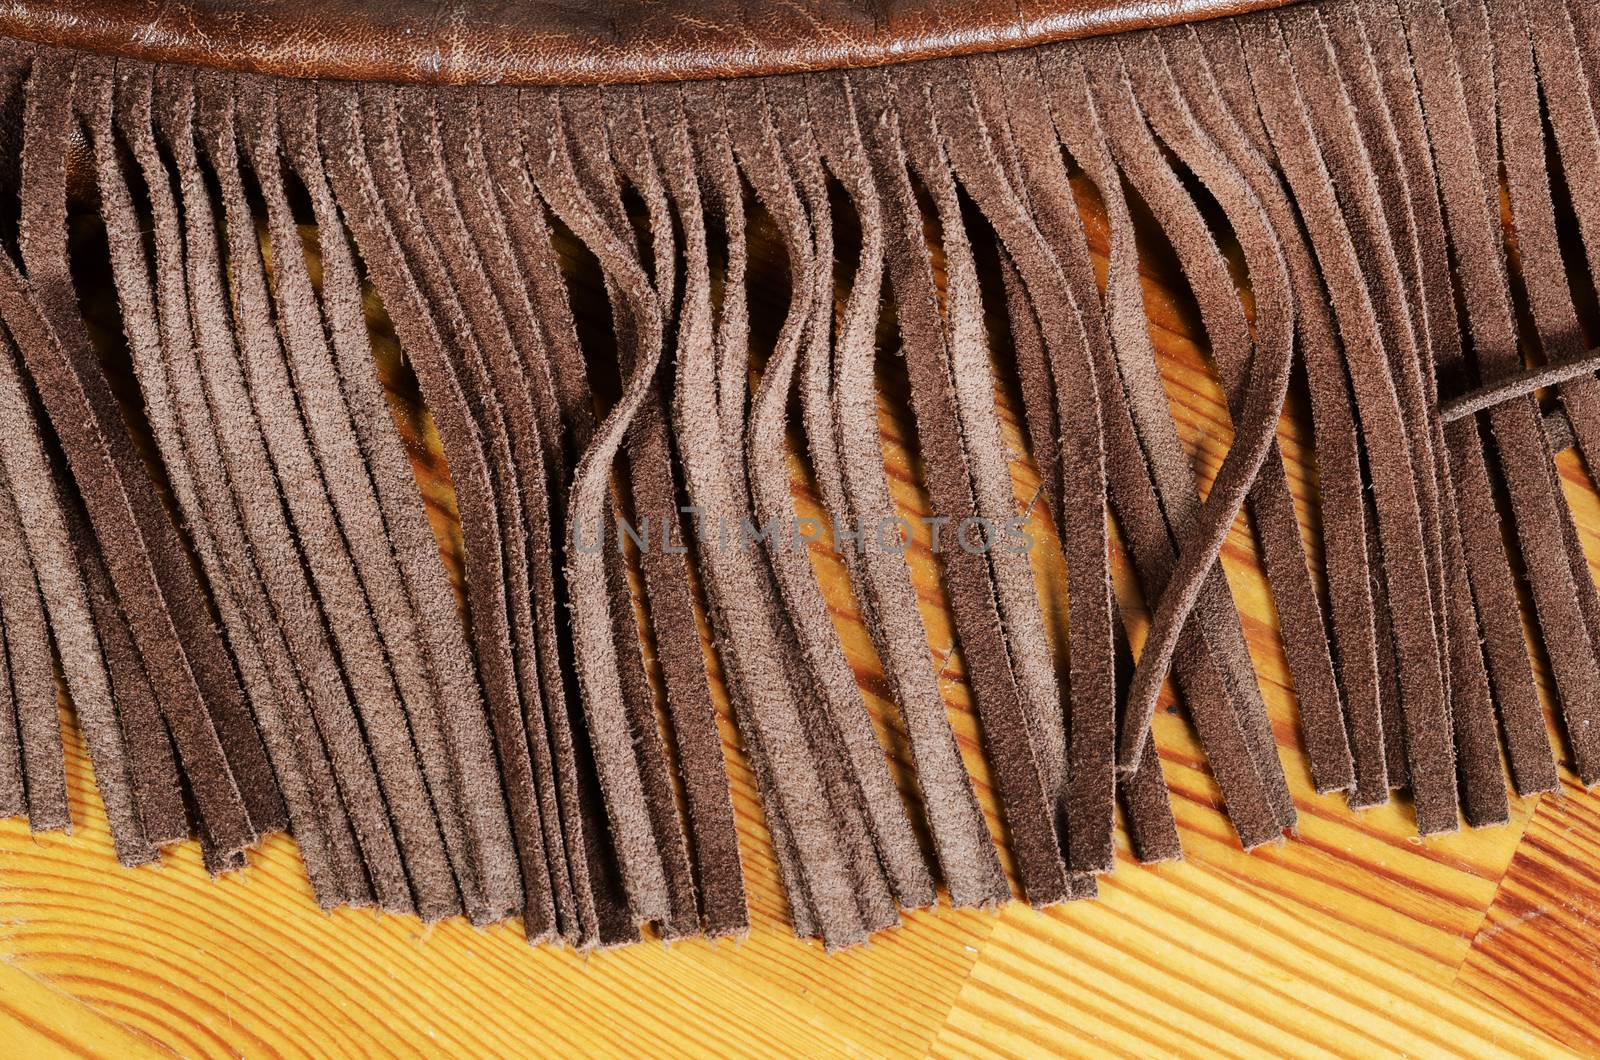 leather bag detail